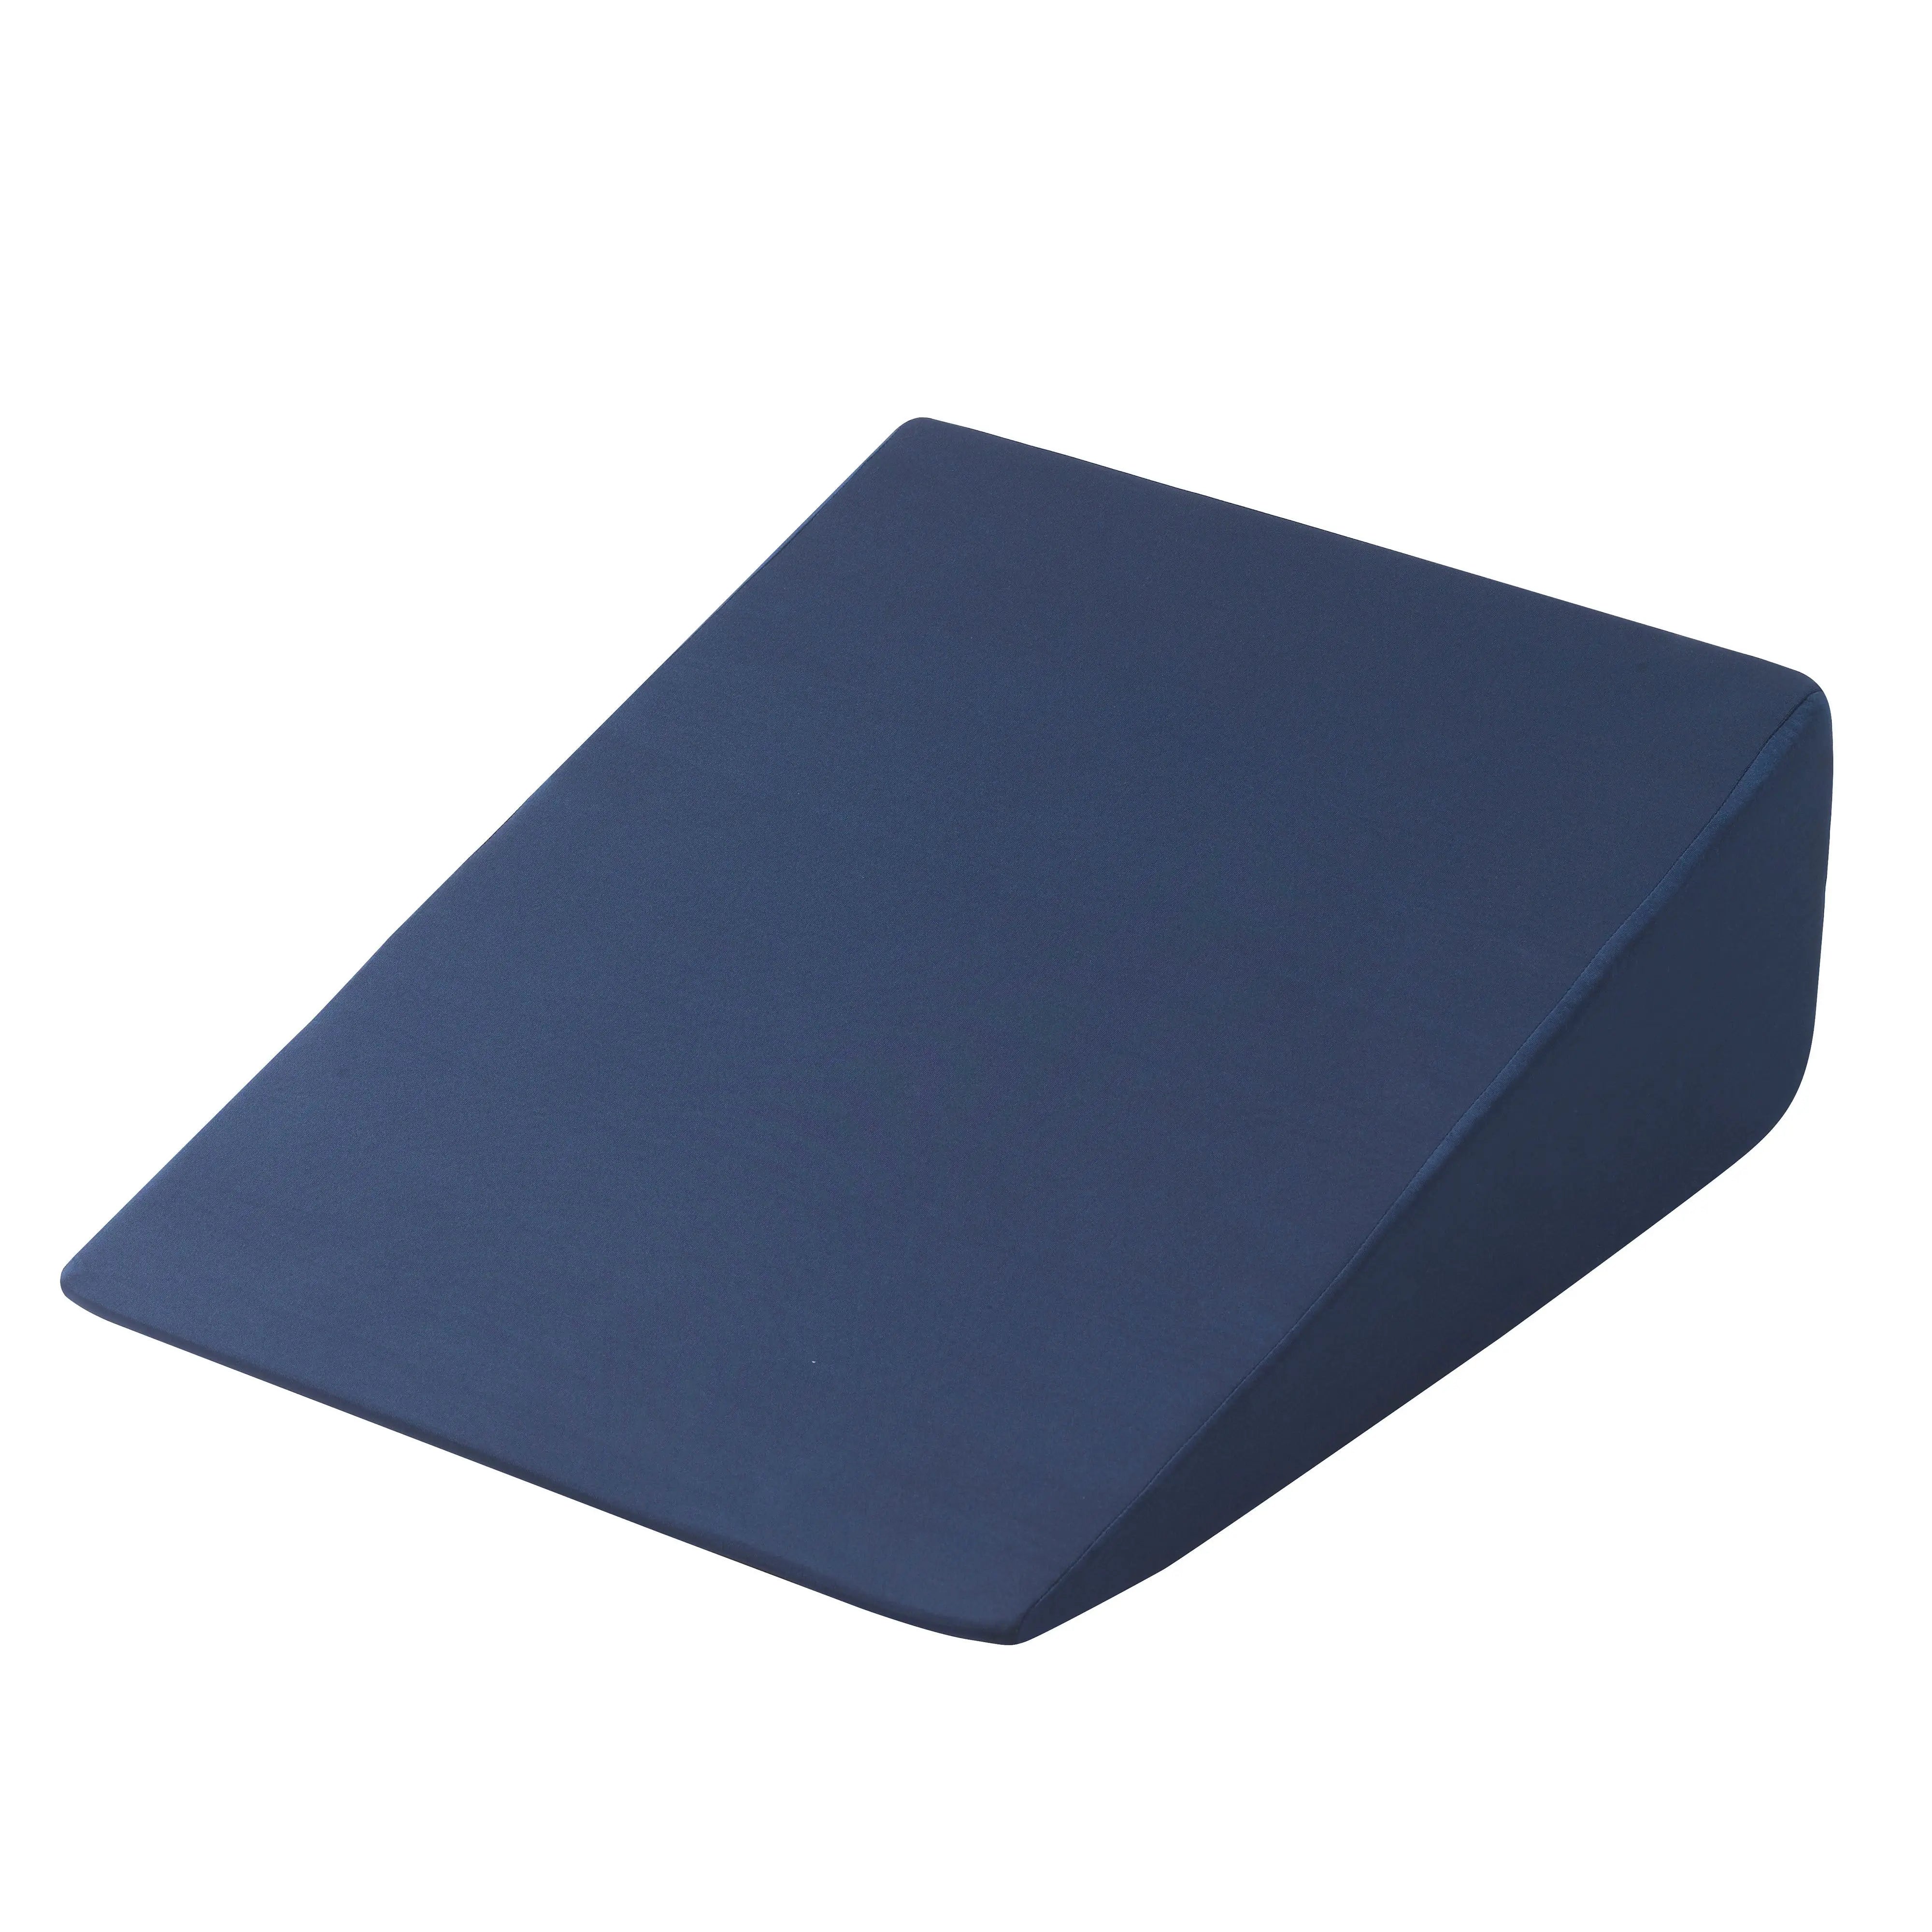 Compressed Bed Wedge Cushion - Home Health Store Inc